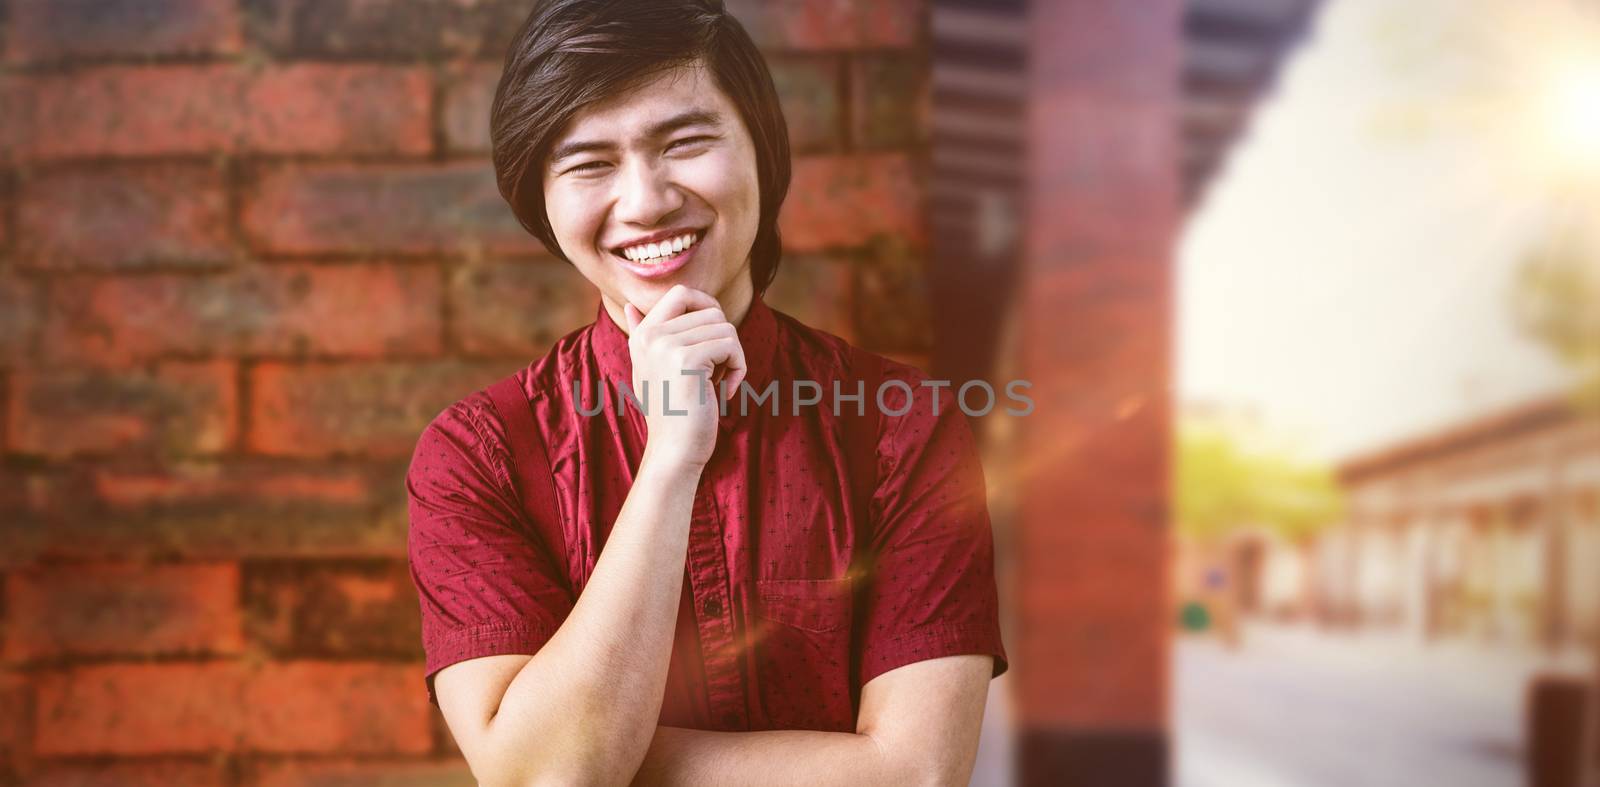 Smiling hipster holding his chin against view of brick wall